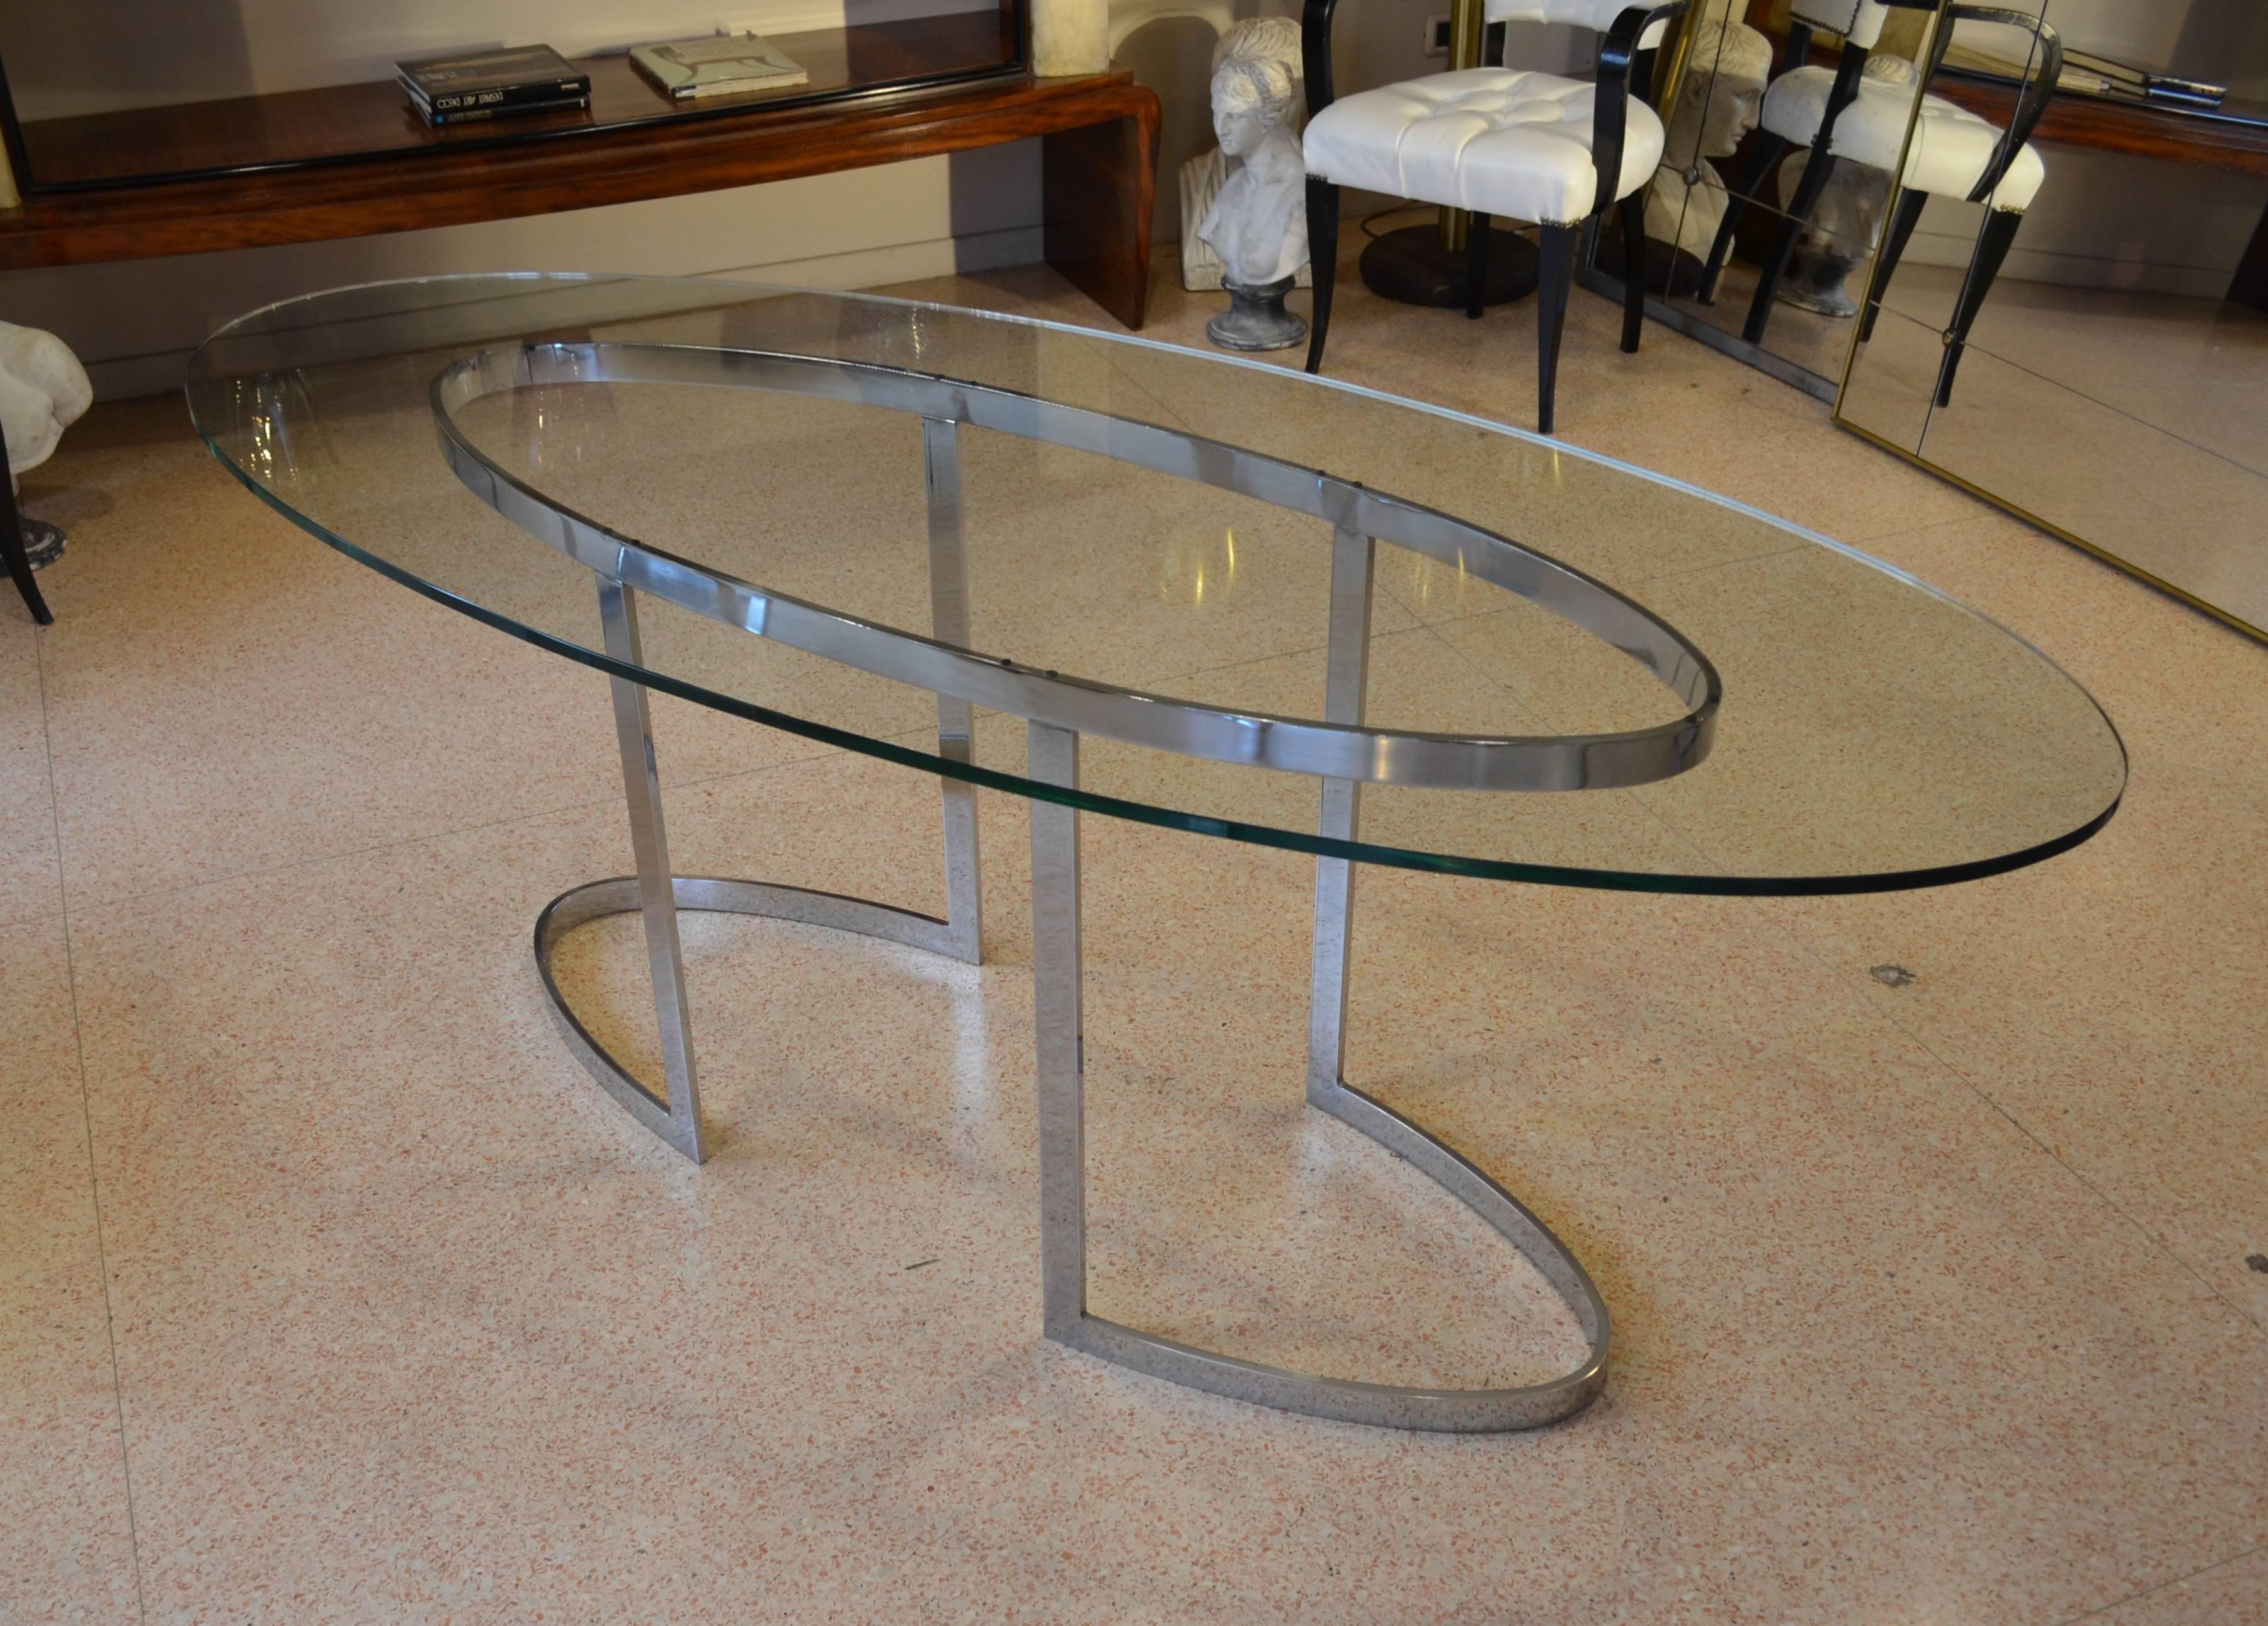 Saporiti table with crystal original top and chrome-plated steel legs structure.
The oval shape and this legs structure is very elegant and useful to welcome more guests at table. It is in perfect conditions. No restoration needed.

To have a (fast